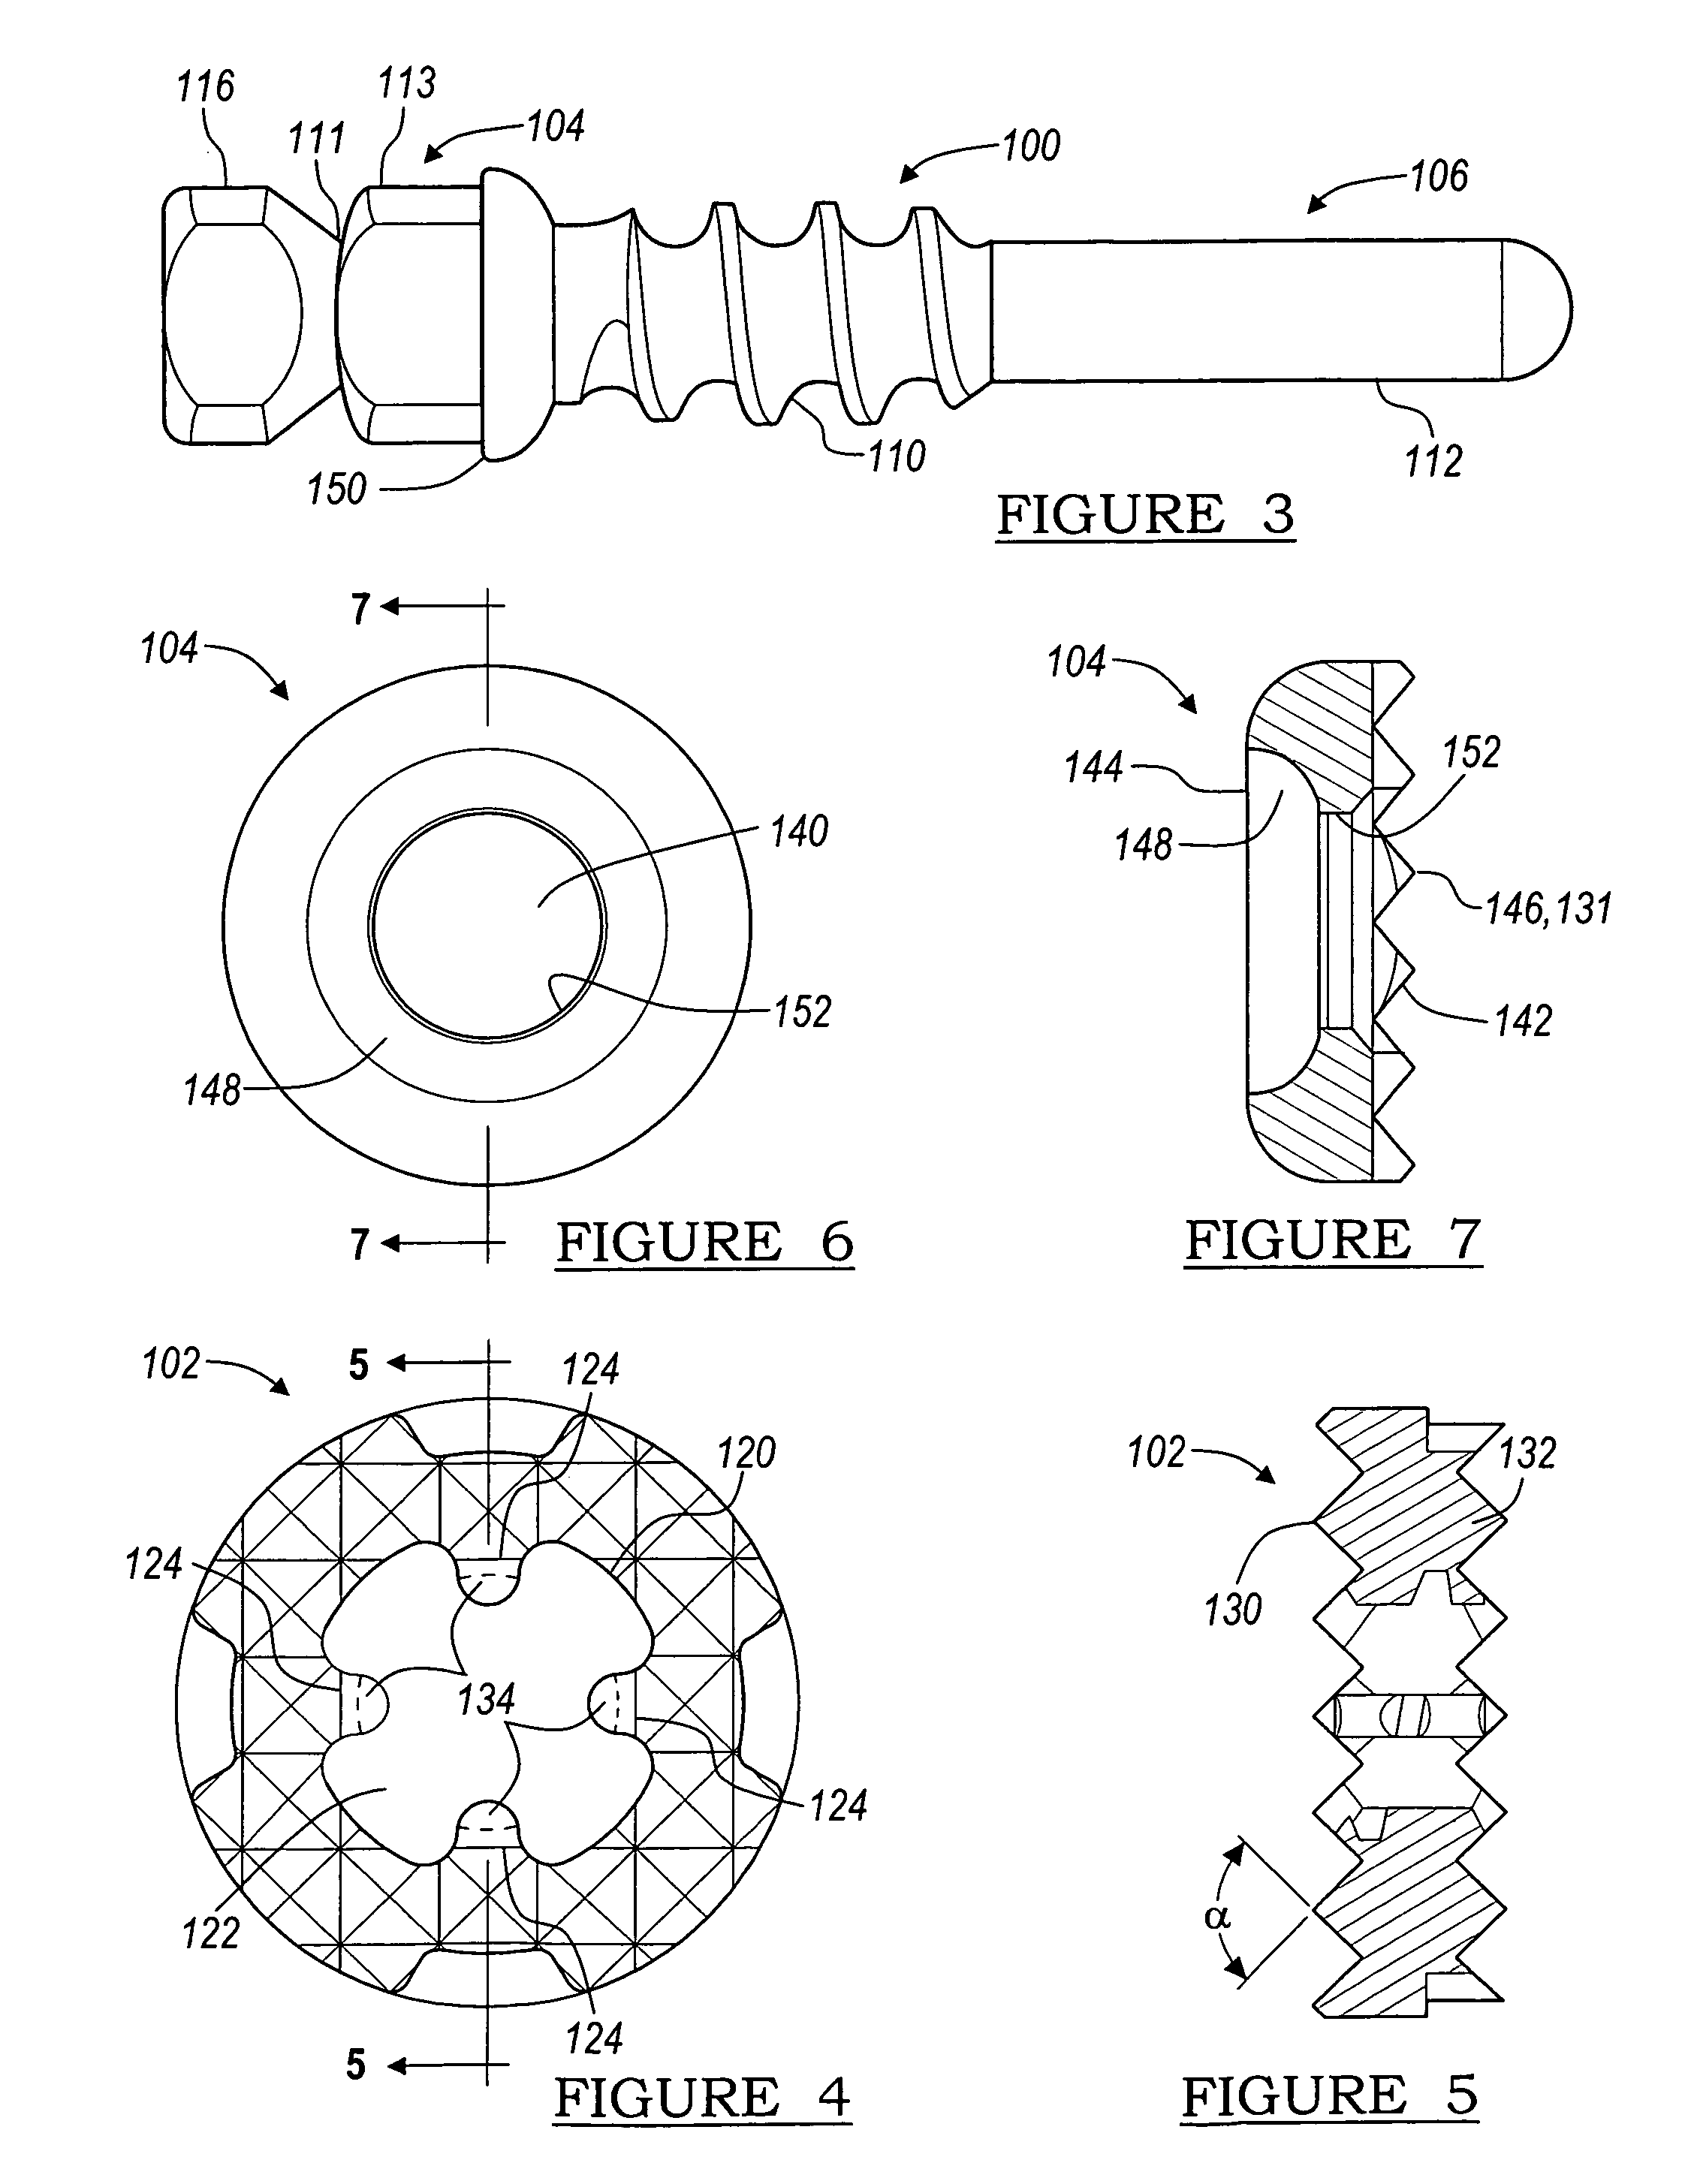 Device and method of fastening a graft to a bone